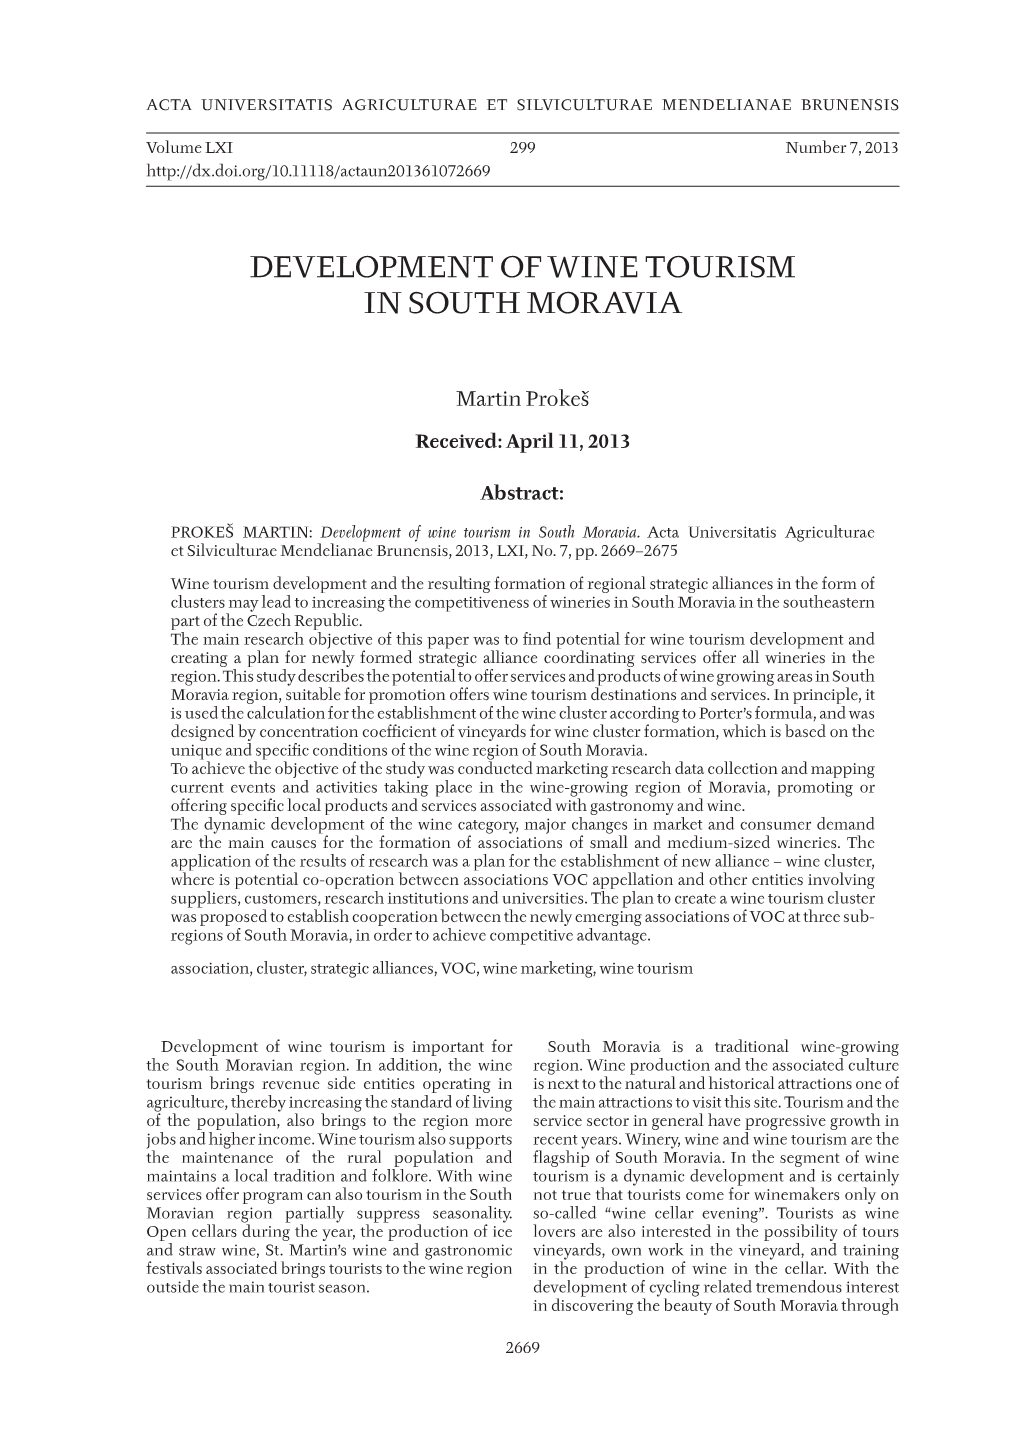 Development of Wine Tourism in South Moravia